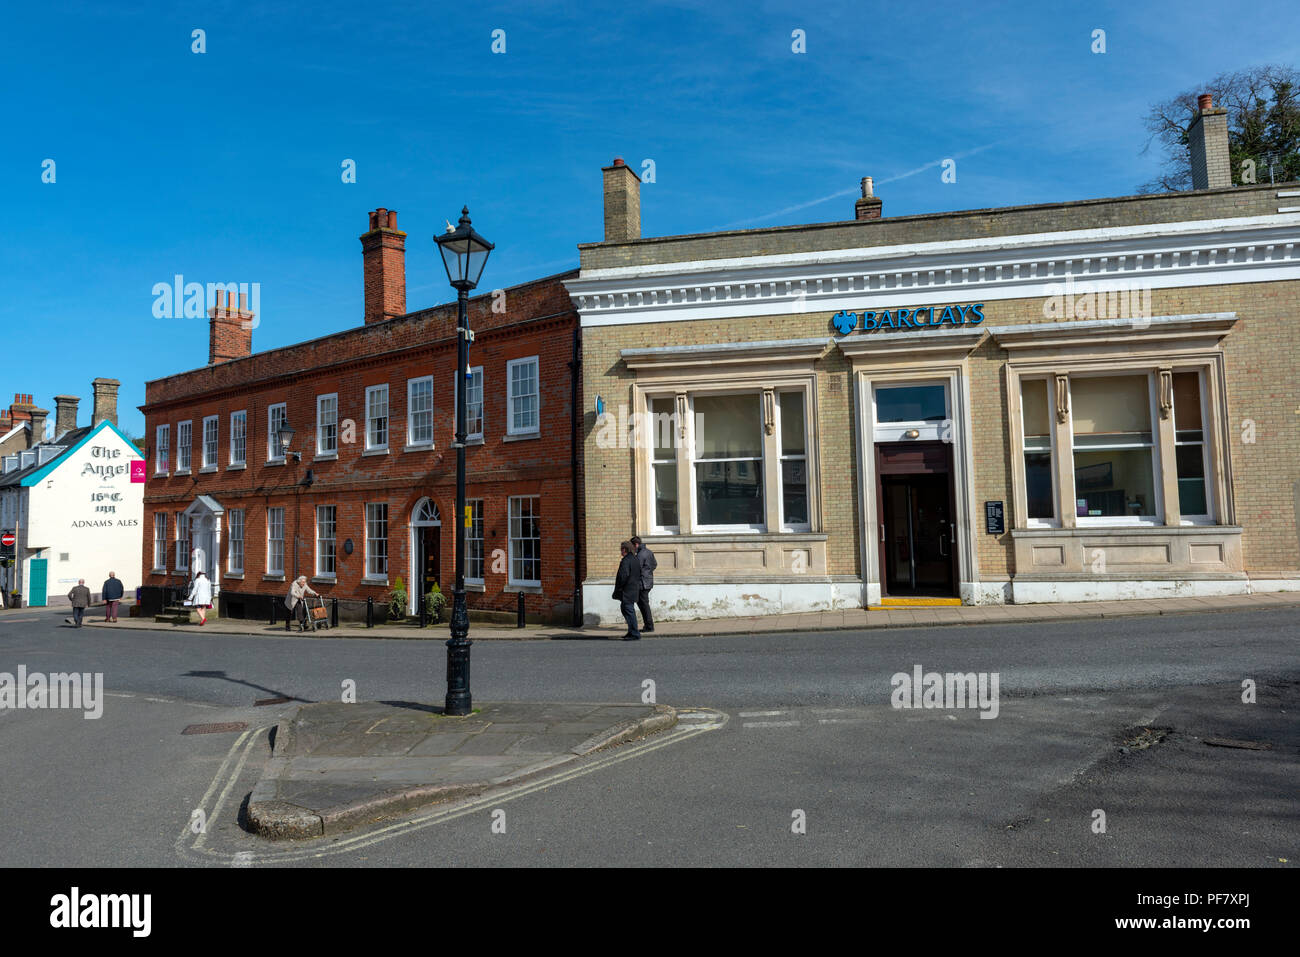 Barclays Bank which will be closed in November 2018 leaving no banks in the town, Halesworth, Suffolk, England. Stock Photo